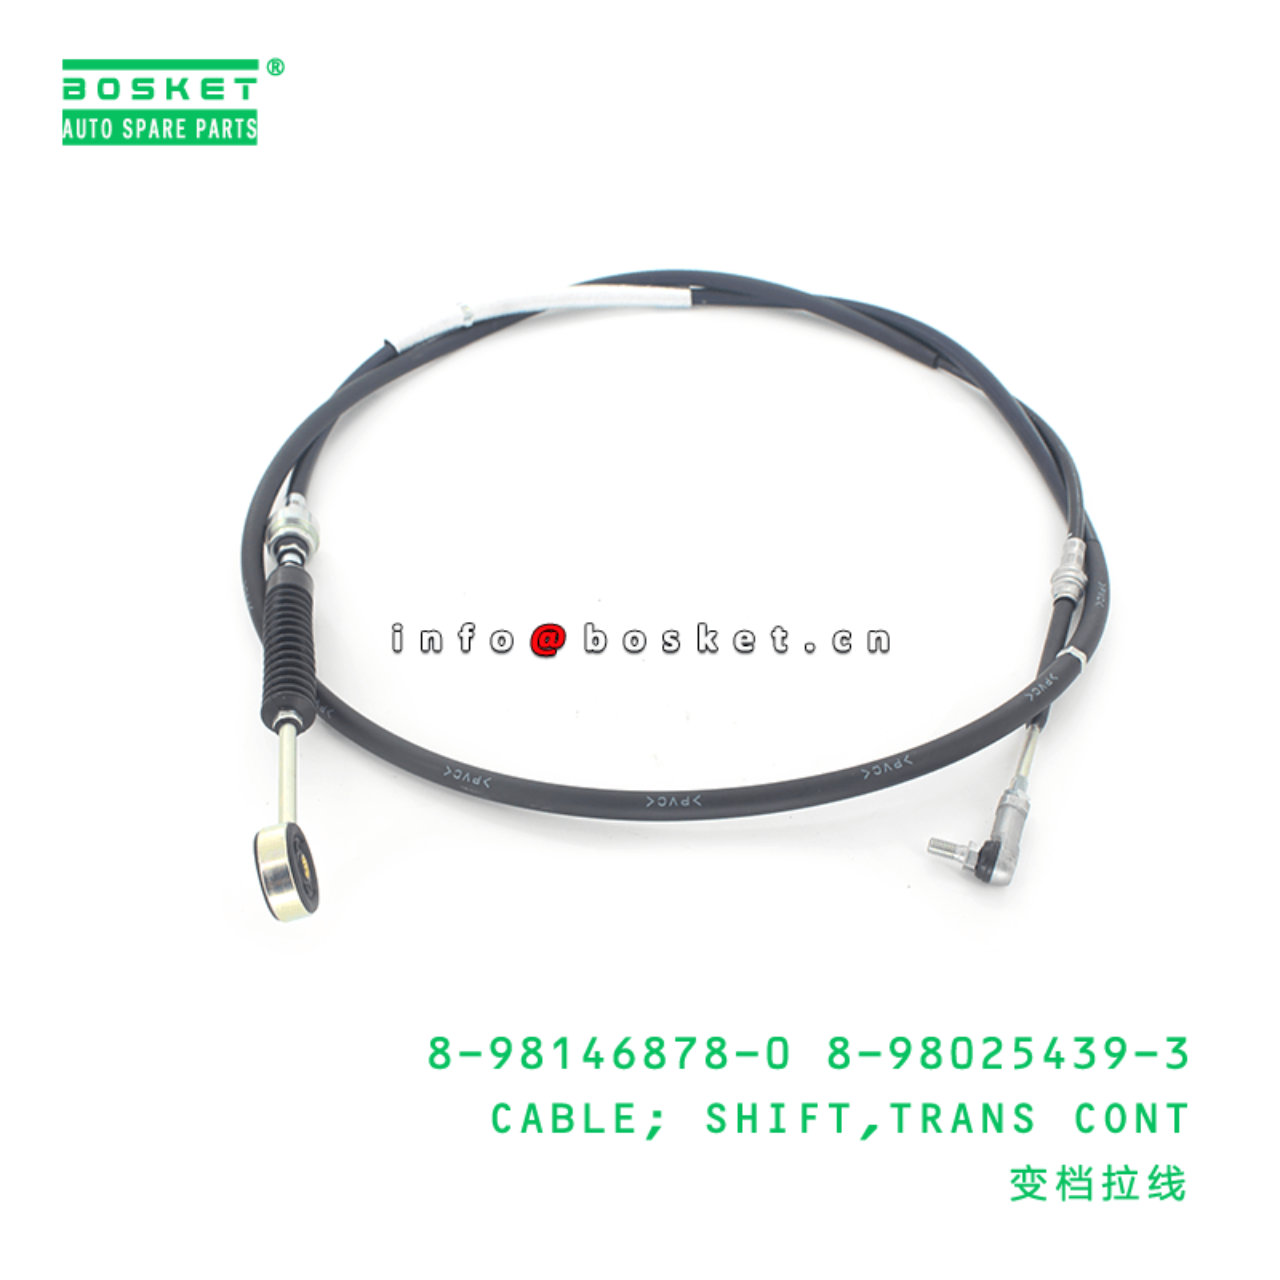 8-98146878-0 8-98025439-3 Transmission Control Shift Cable 8981468780 8980254393 Suitable for ISUZU 